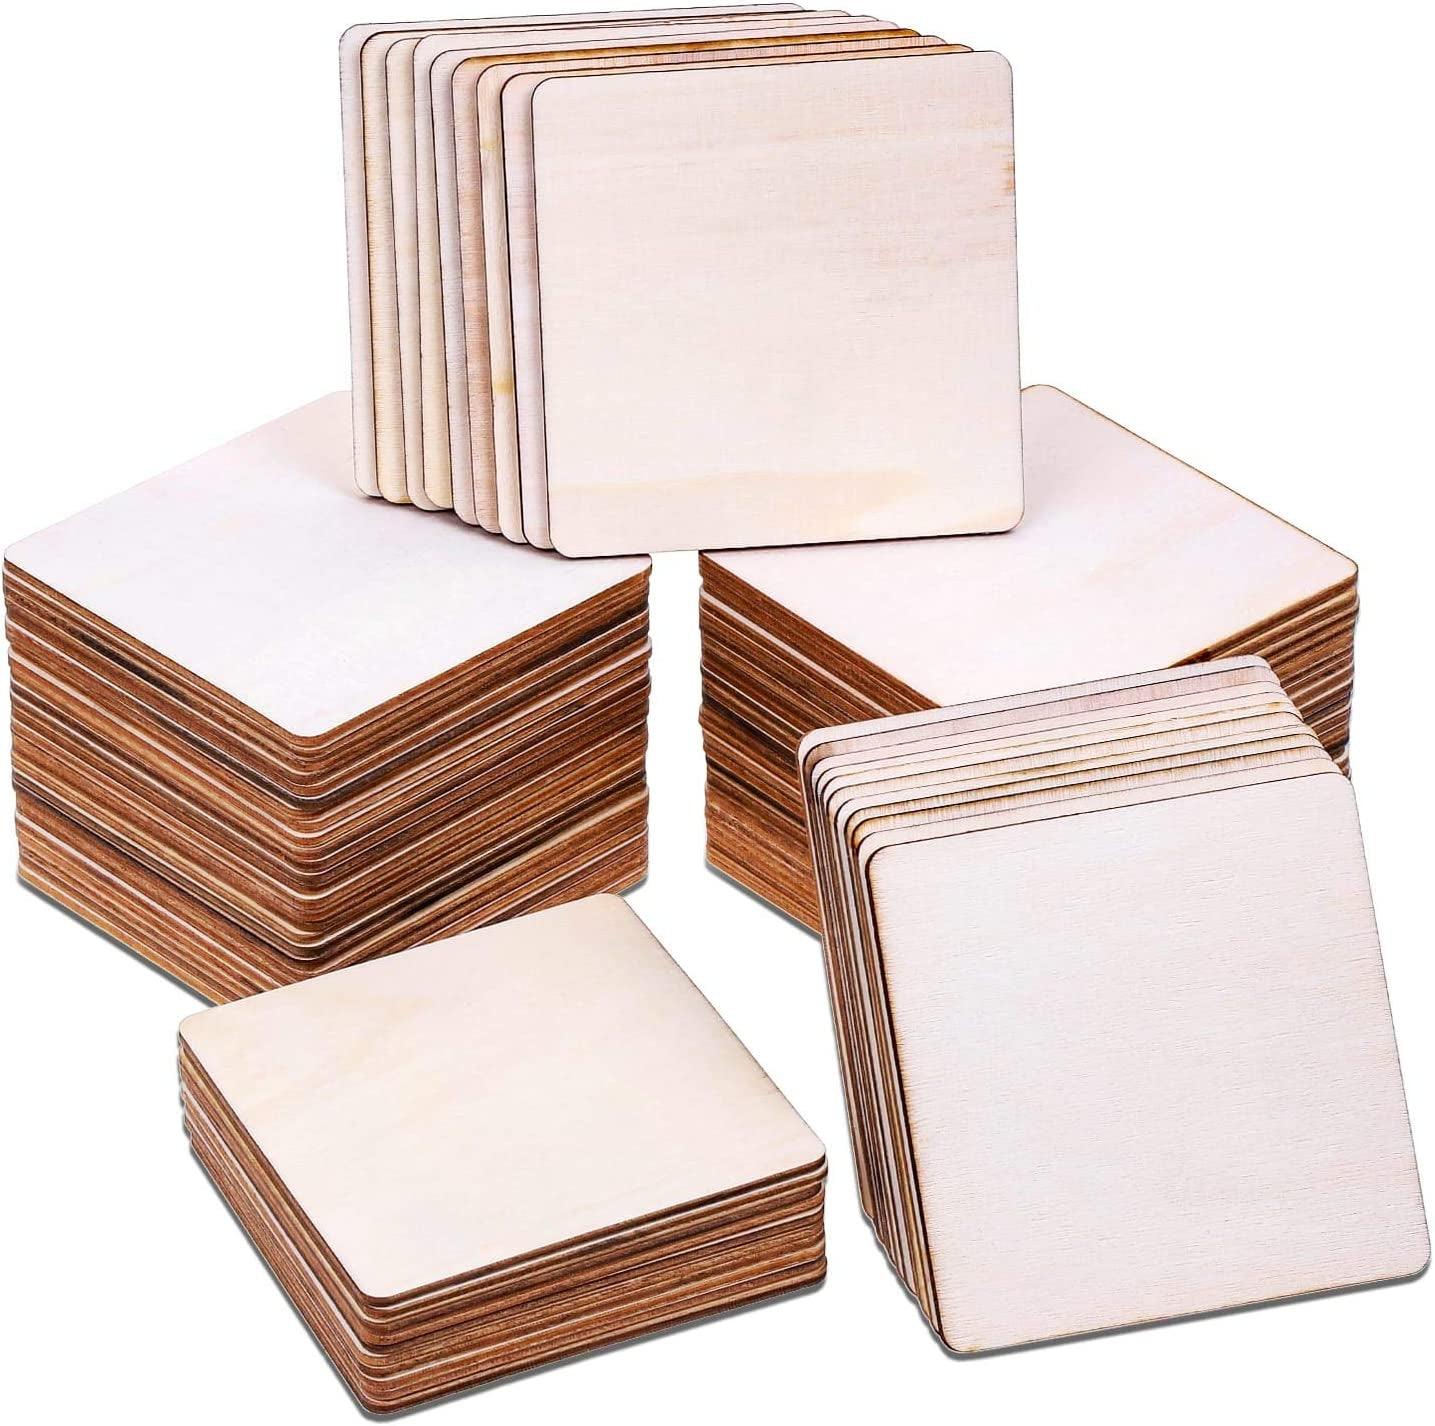 15-Pack Unfinished 3x3 Wood Squares for Crafts, Blank Wood Wooden Tiles for  Wood Burning, DIY Supplies, Coasters, Cutouts, Engraving